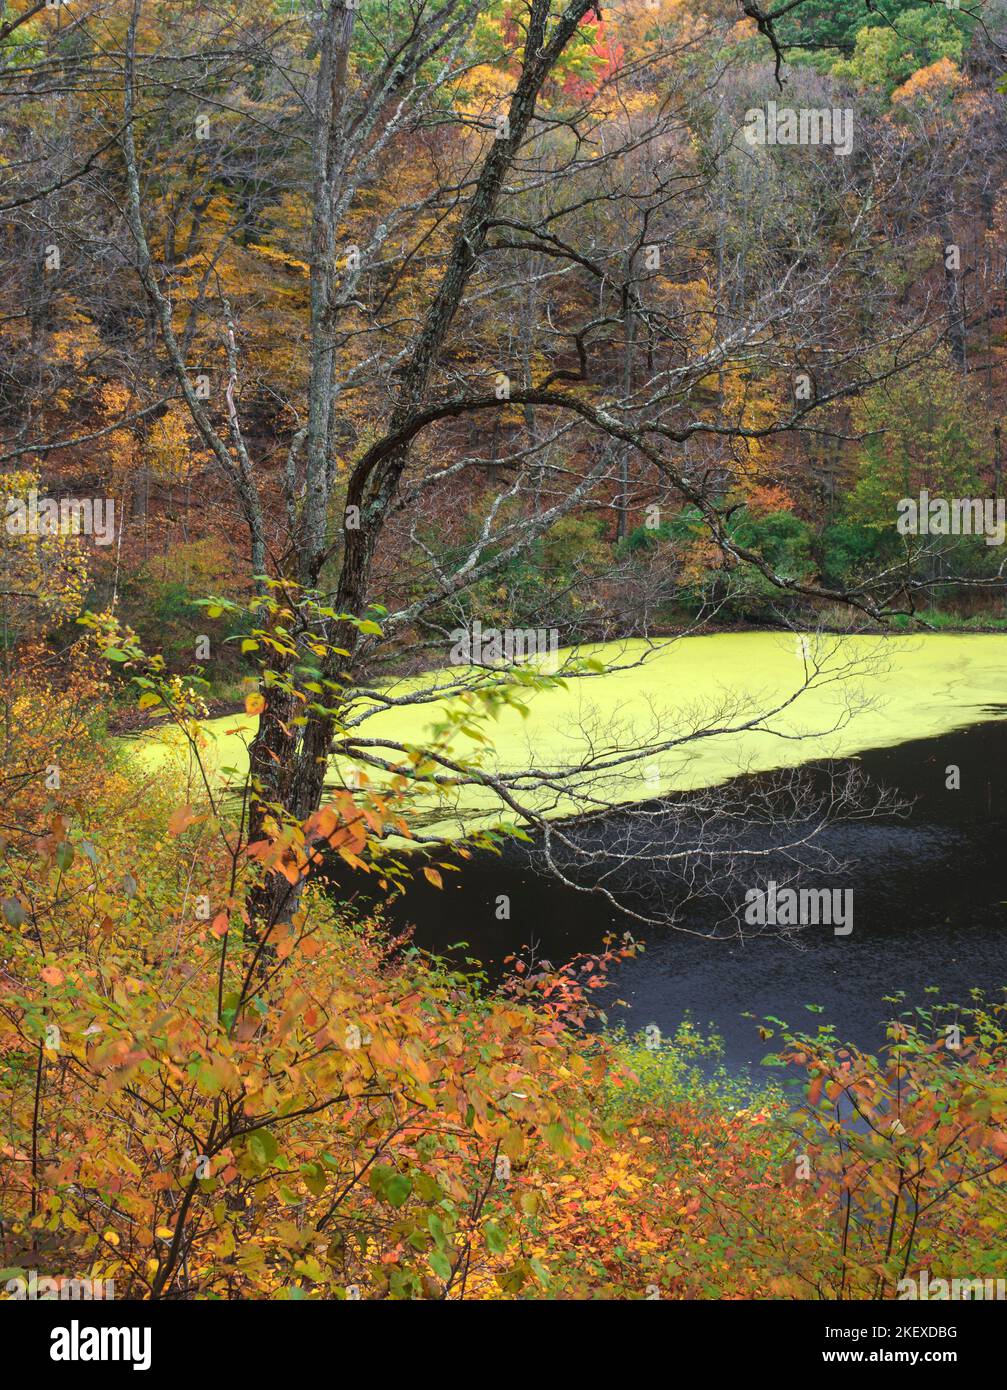 Greenbush Kettle is a kettle lake in the Kettle Moraine State Forest, In Manitowoc County, Wisconsin, shown here in autumn. Stock Photo